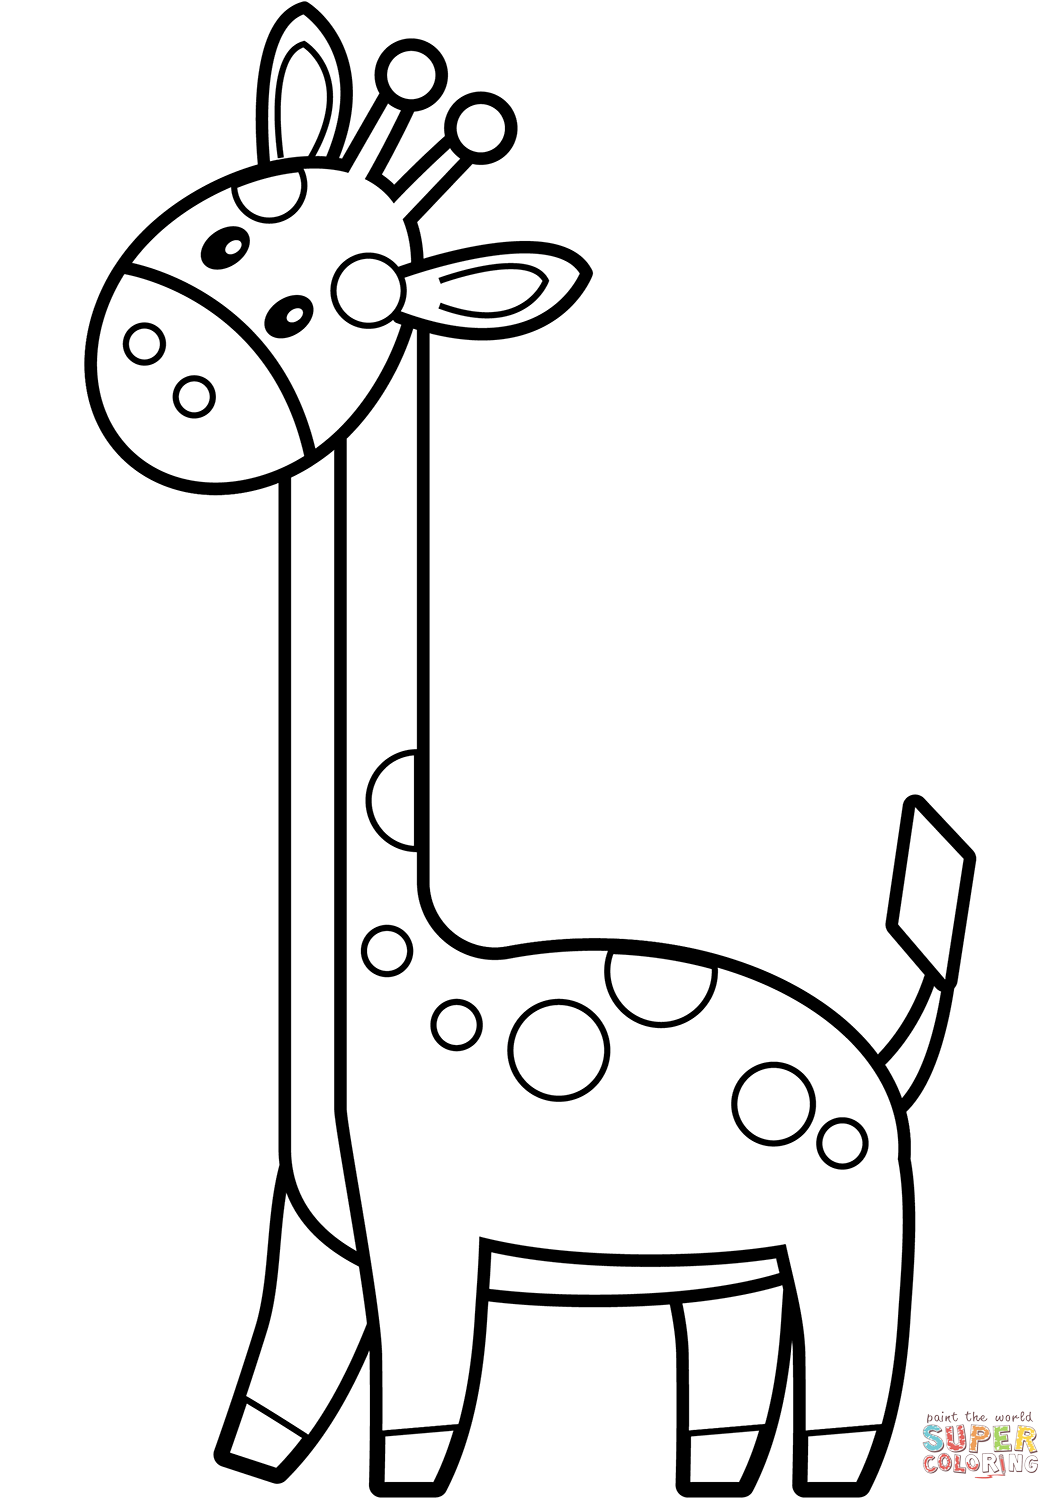 Cute giraffe coloring page free printable coloring pages